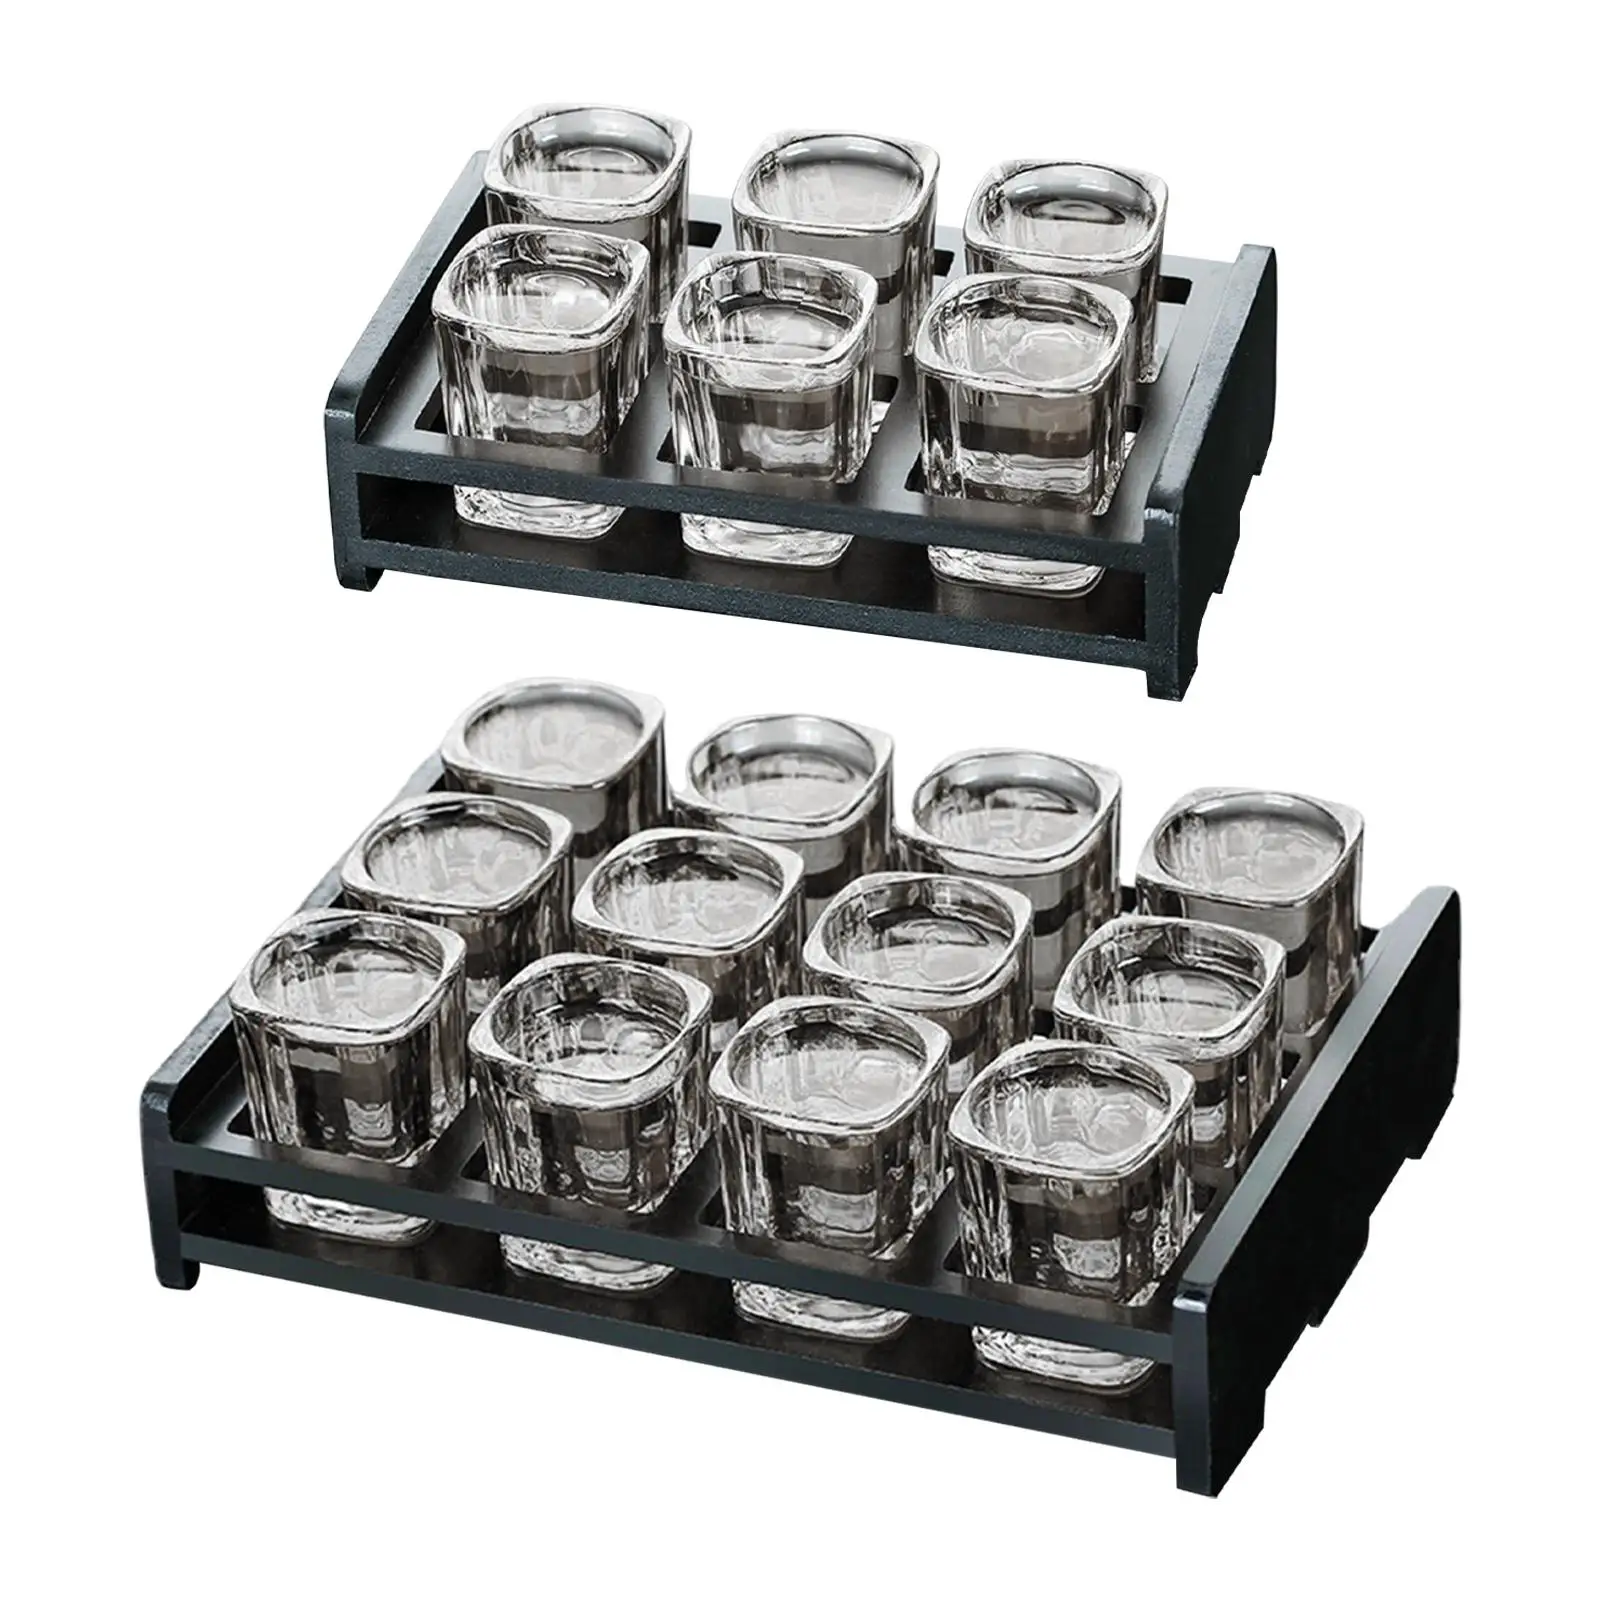 Beer Glass Tray Pub Display Rack for Party Glass Server Wine Glass Cup Serving Tray Glassware Glass Holder Tray Beer Tray Holder